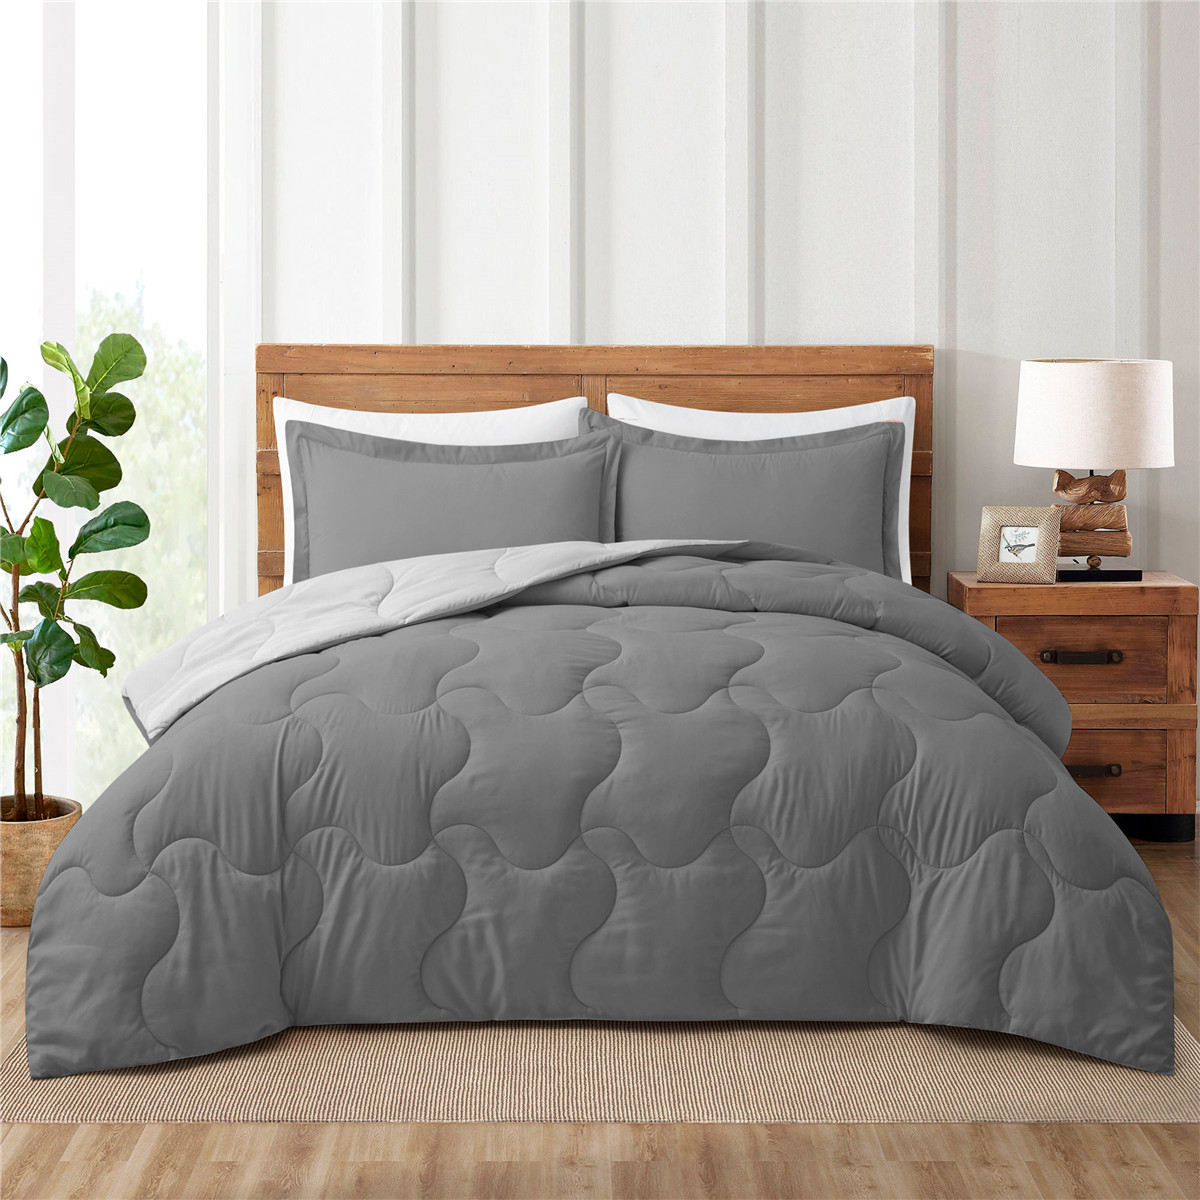 Peace Nest 3-Piece Lightweight Solid Reversible Quilted Down Alternative Comforter and Shams Bedding Set, Queen - image 1 of 6